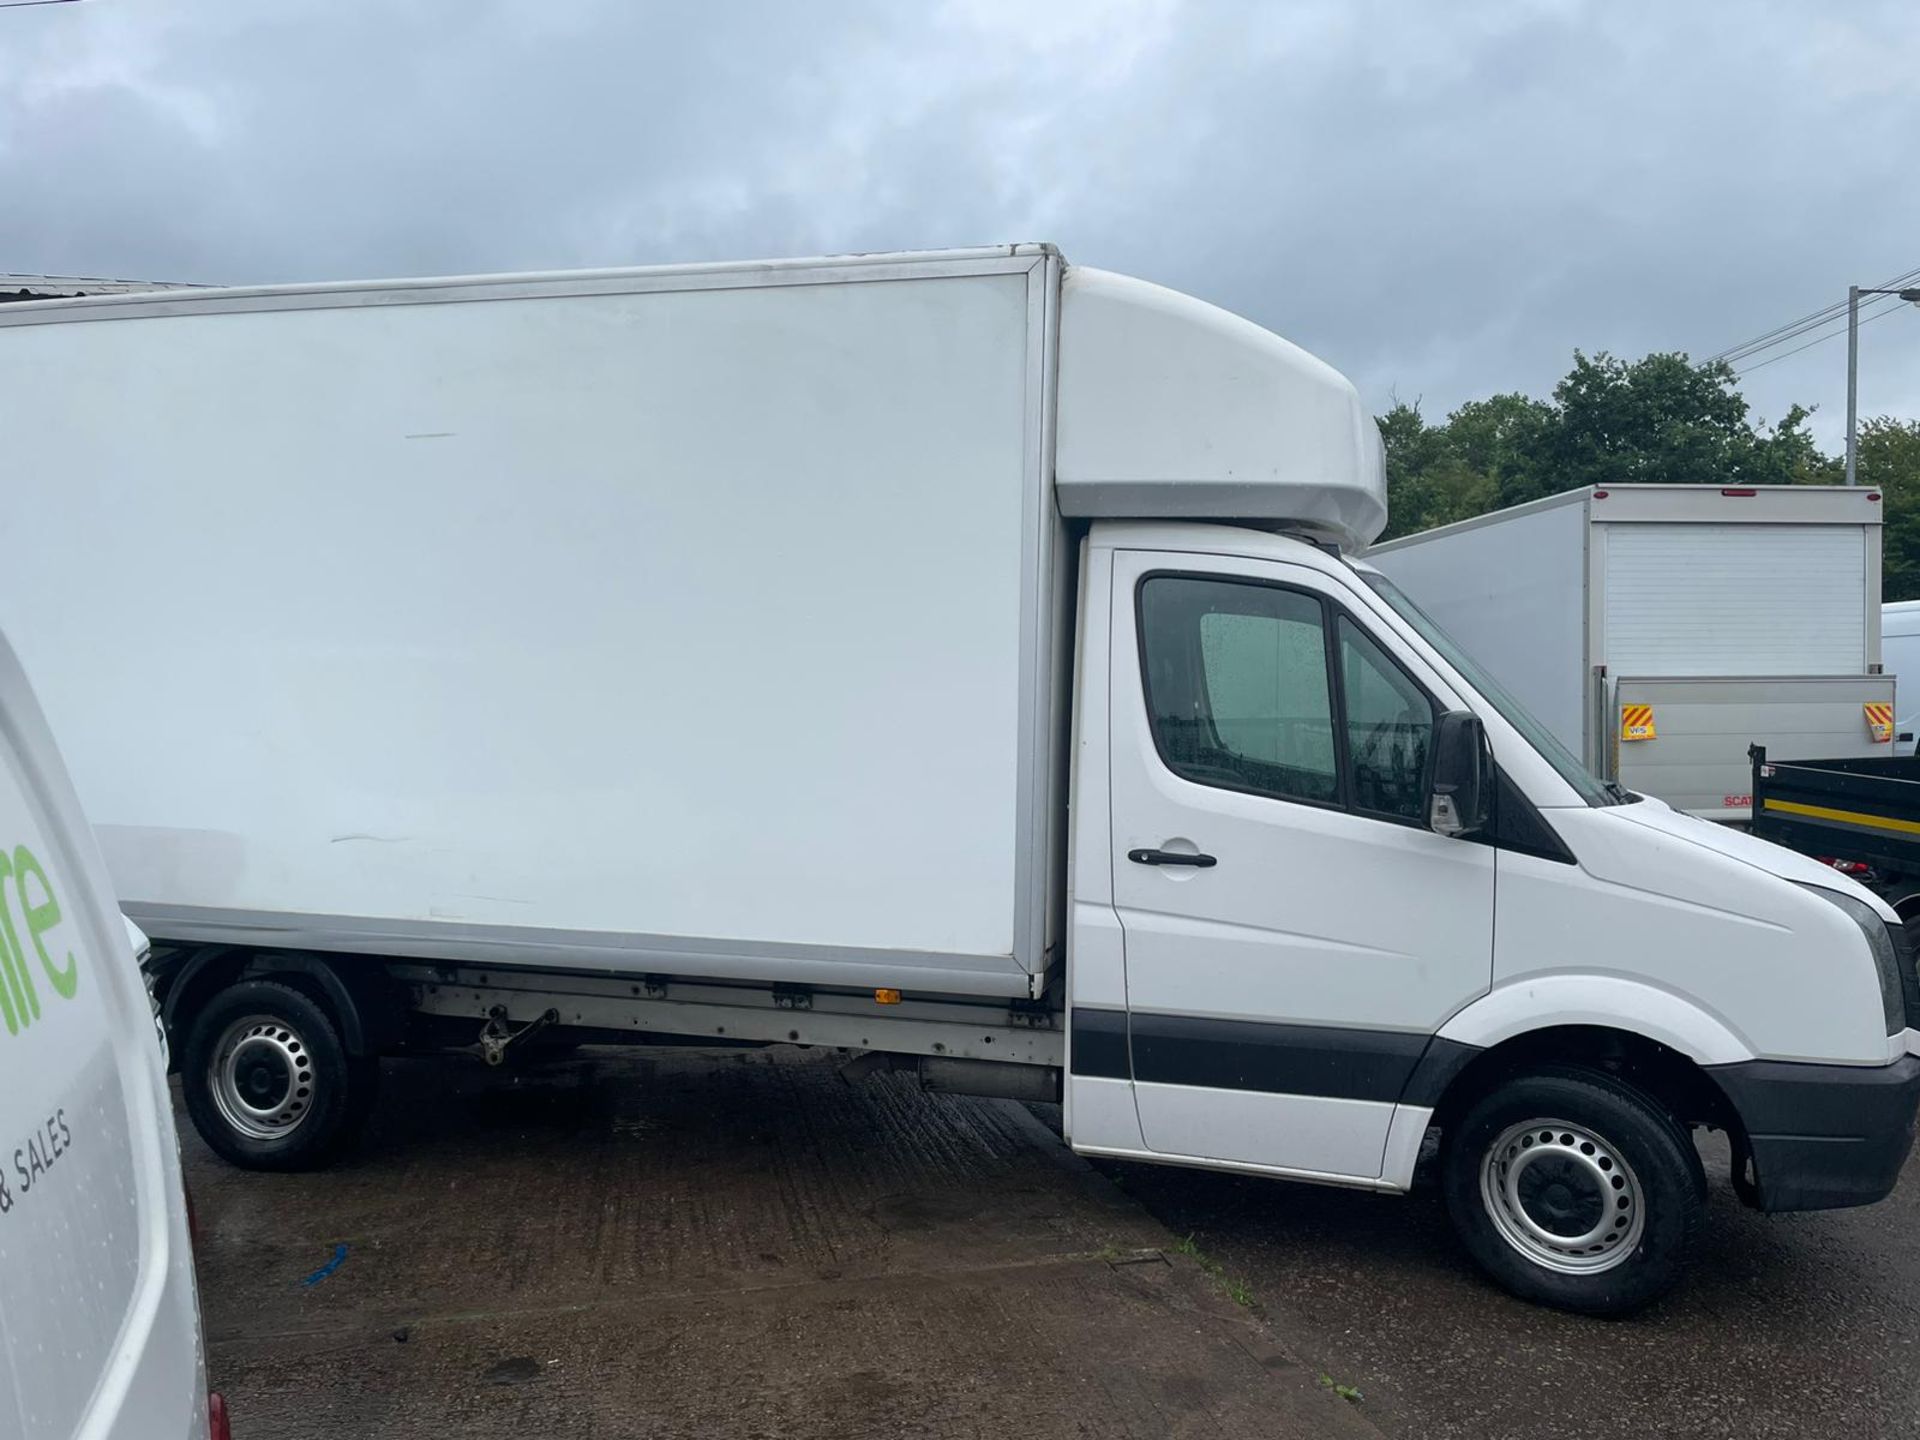 2015 VOLKSWAGEN CRAFTER LUTON VAN WITH TAIL LIFT - 2.0 TDI ENGINE - 144,876 MILES - Image 9 of 9